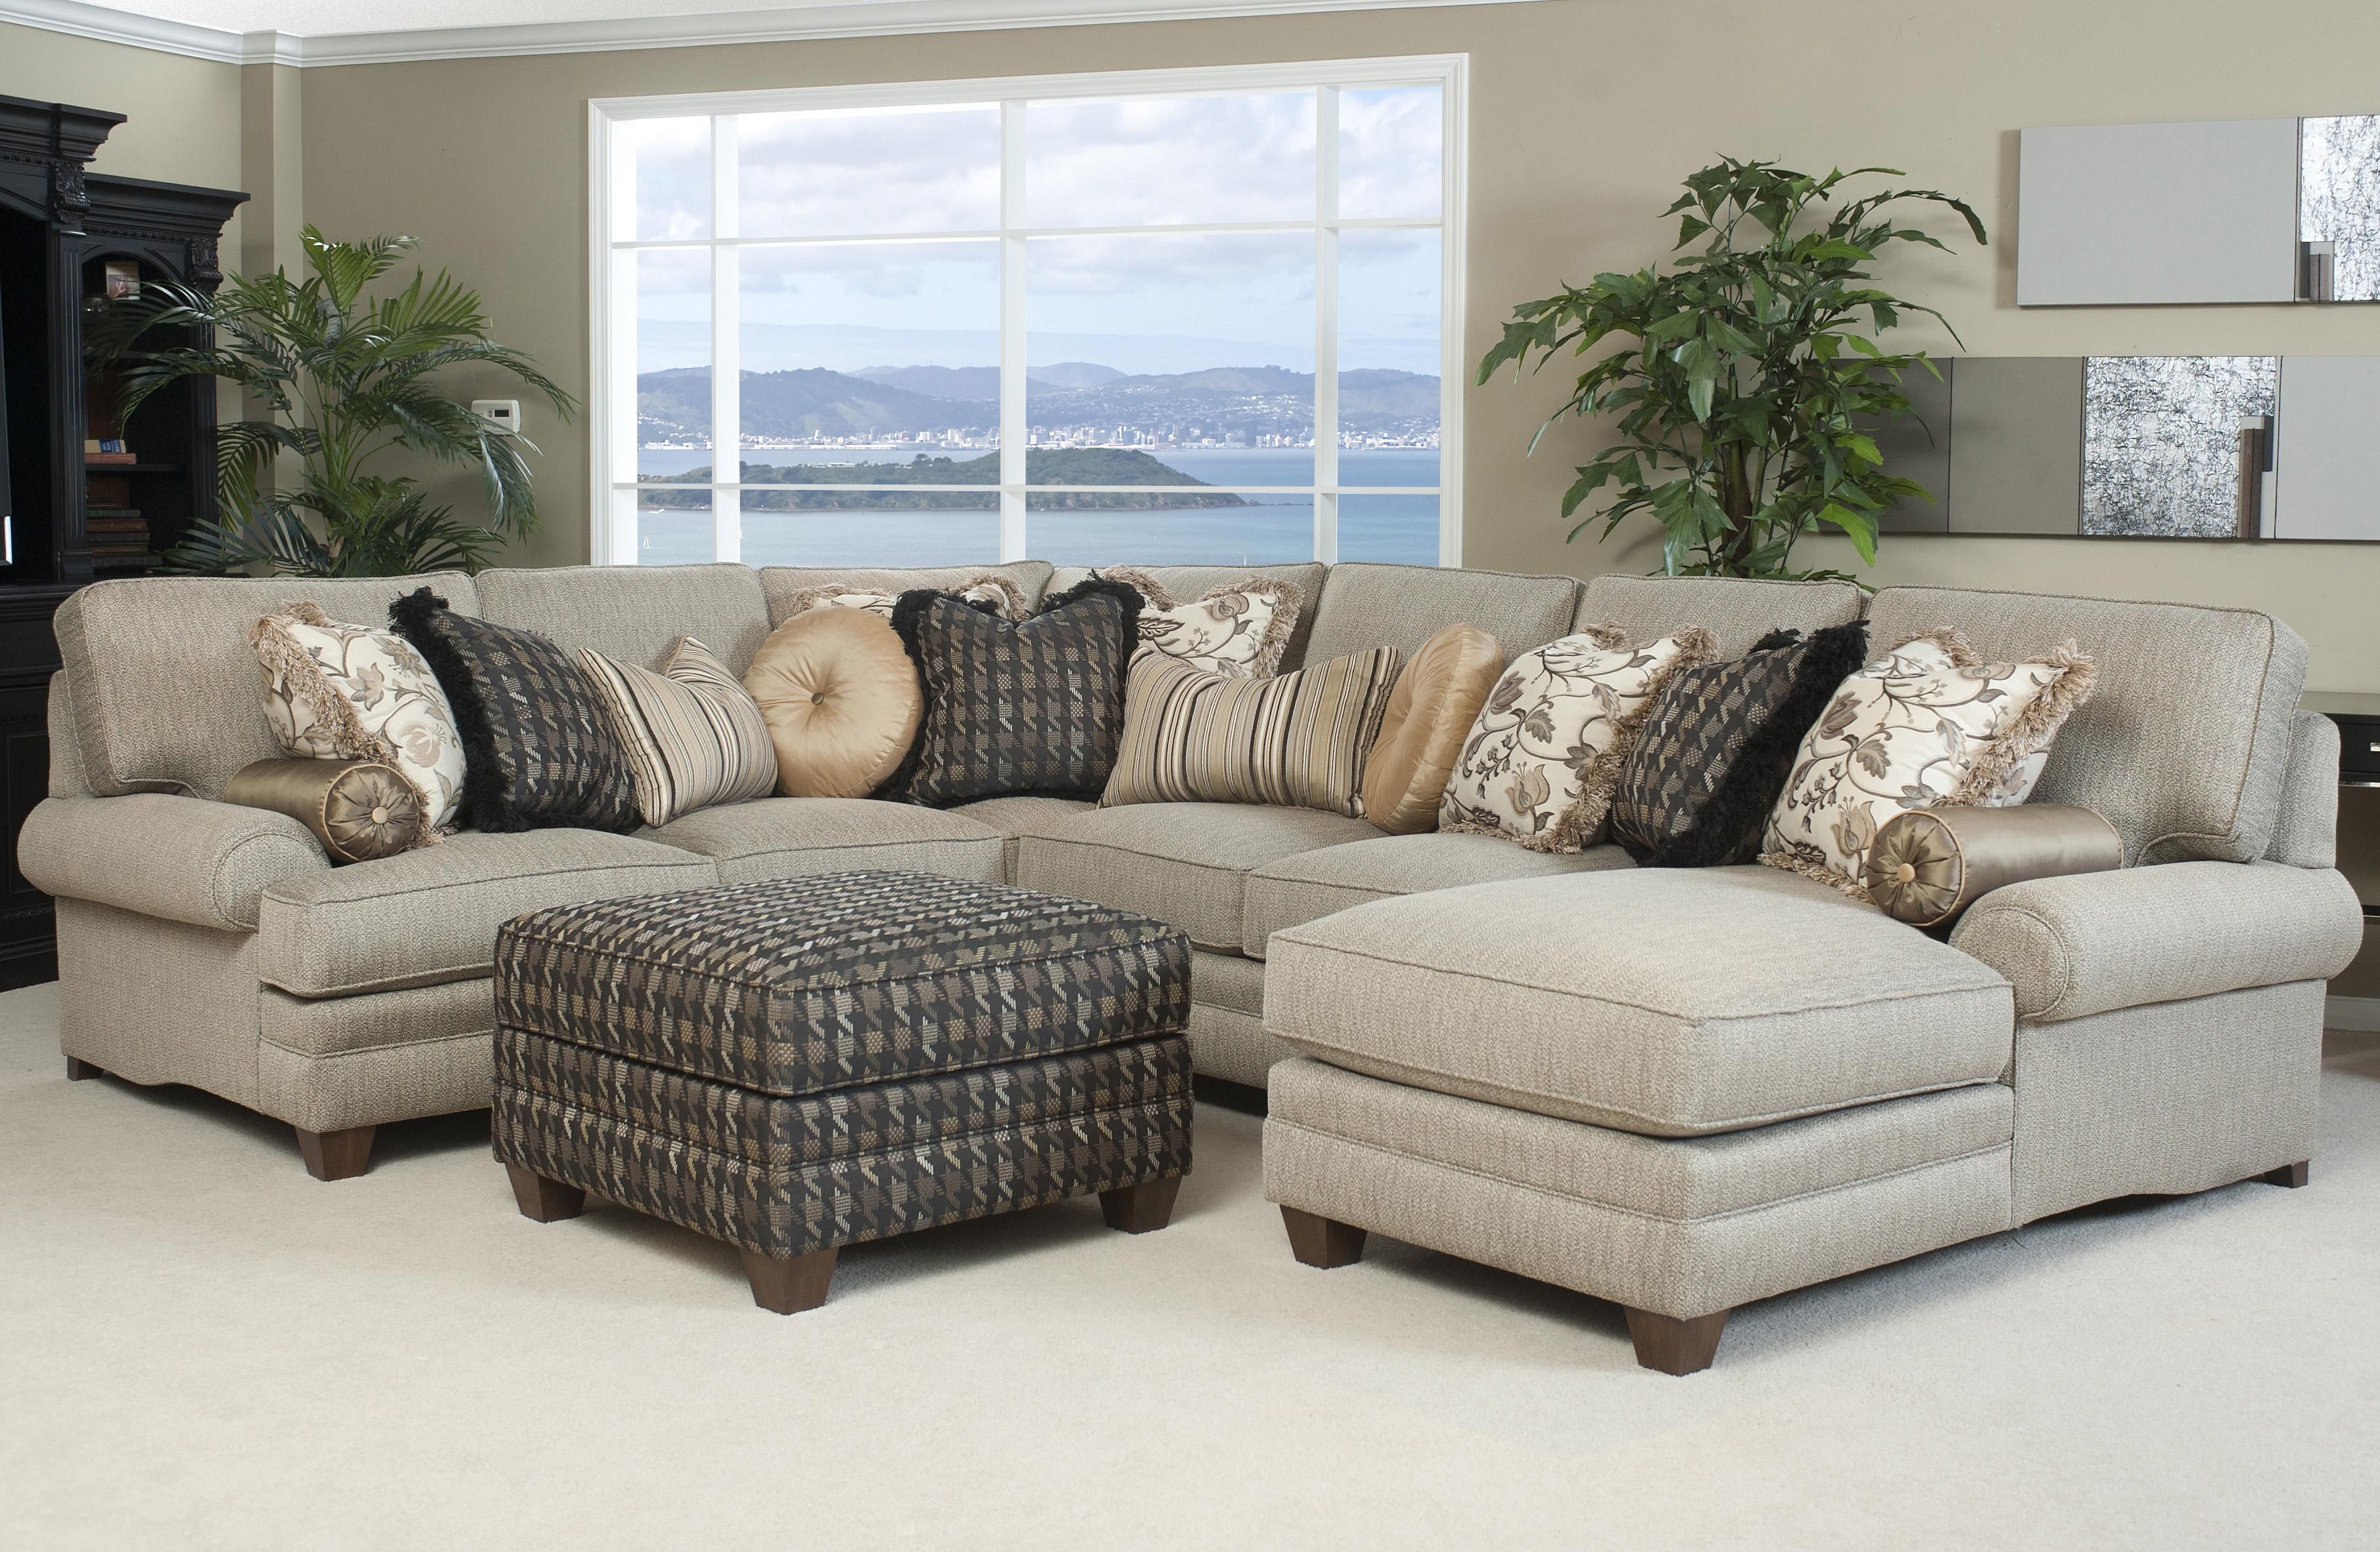 Traditional Styled Sectional Sofa With Comfortable Pillowed Seat For Comfortable Sectional Sofa (View 1 of 12)